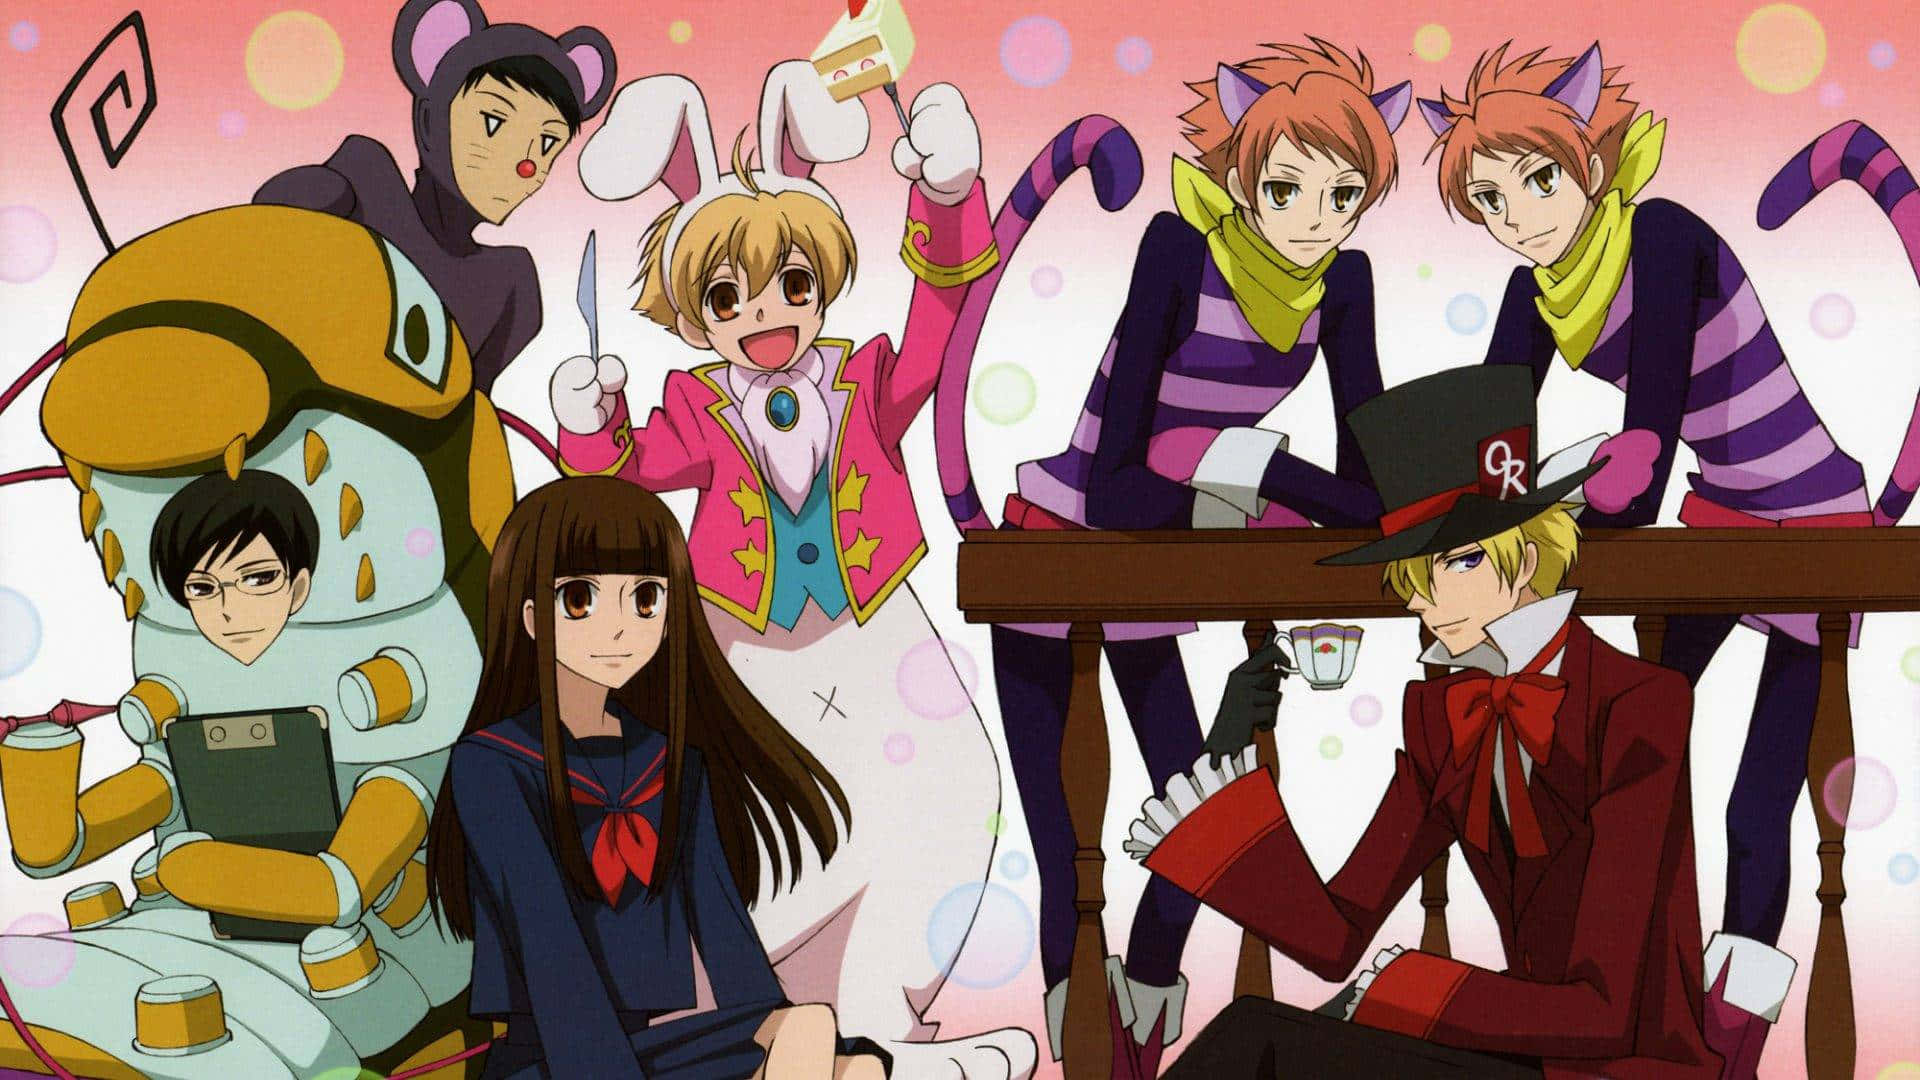 Ouran High School Host Club Anime Characters Group Photo Wallpaper